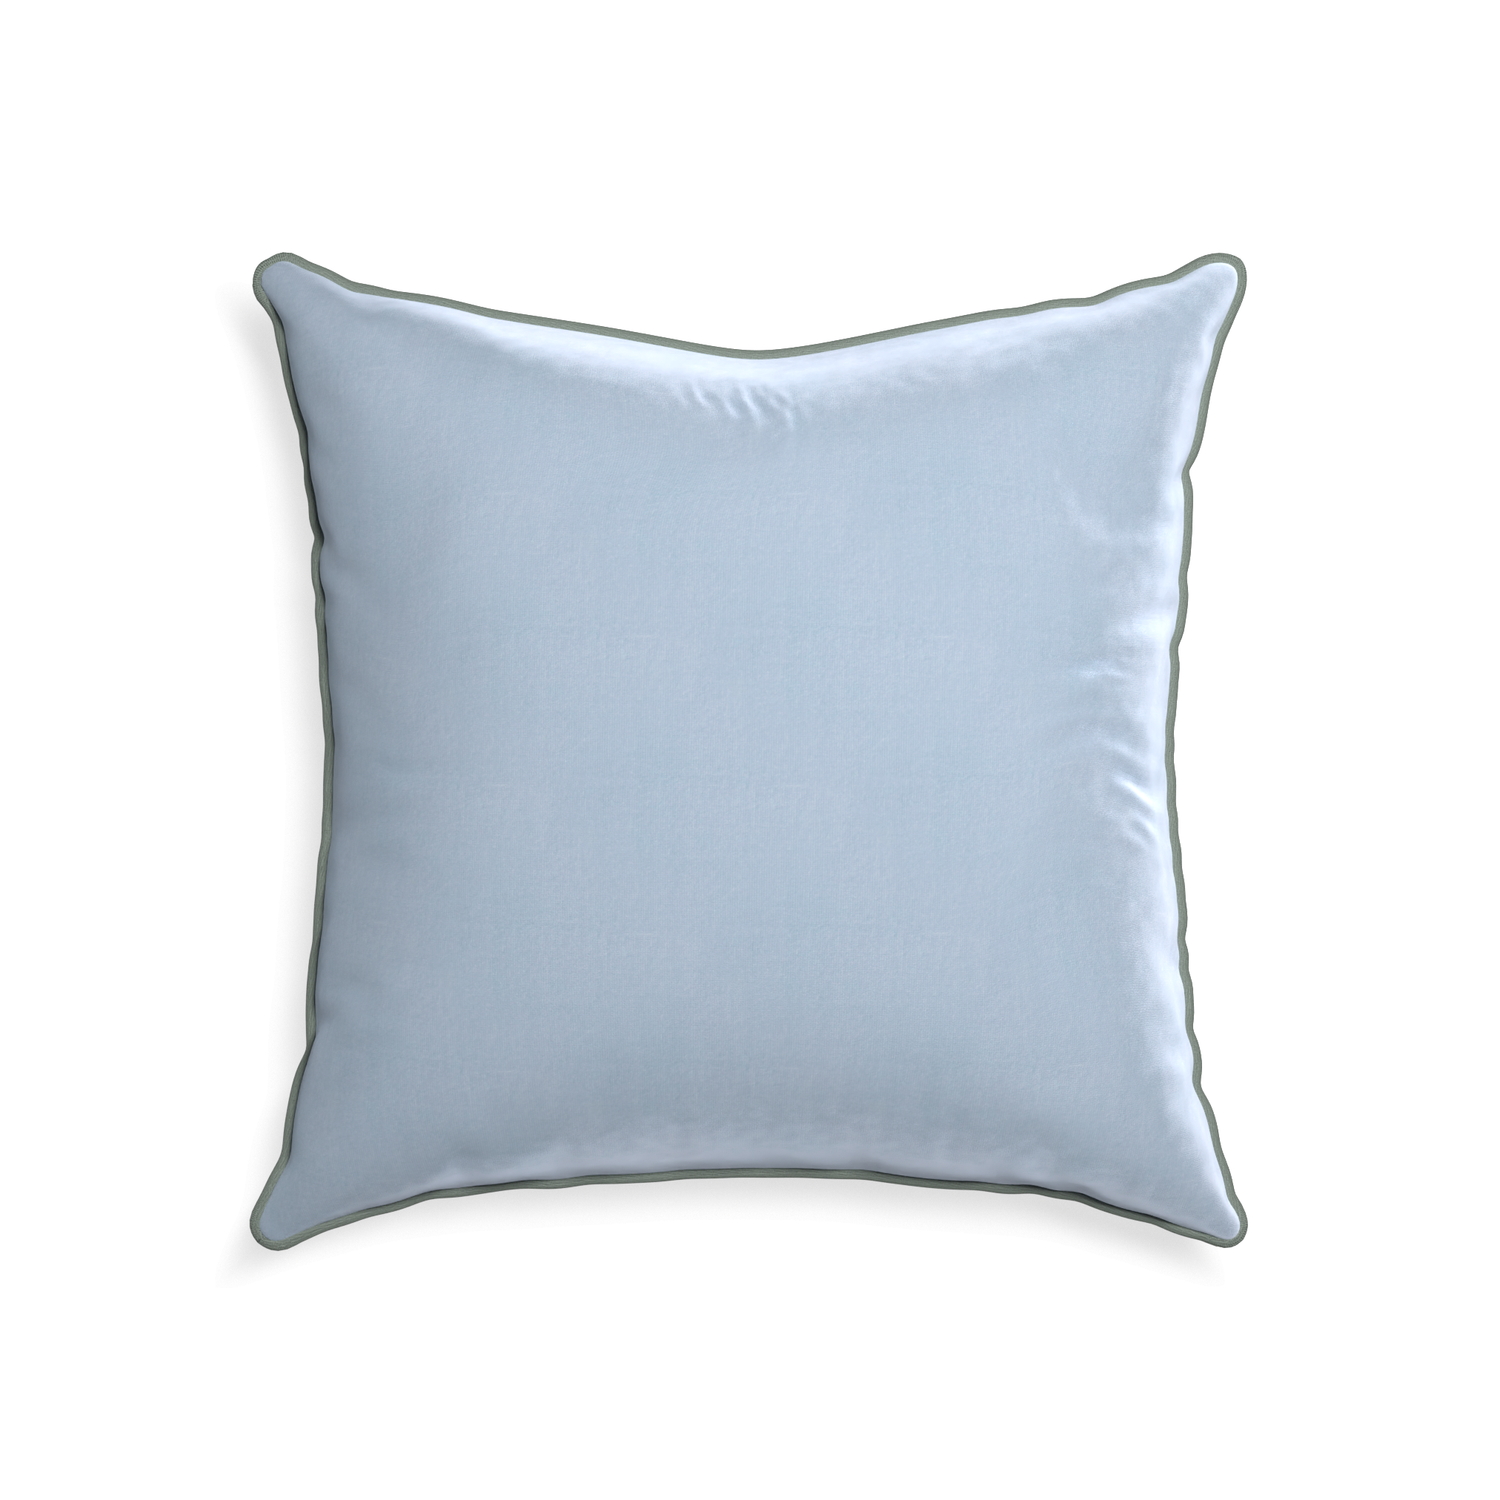 22-square sky velvet custom skypillow with sage piping on white background